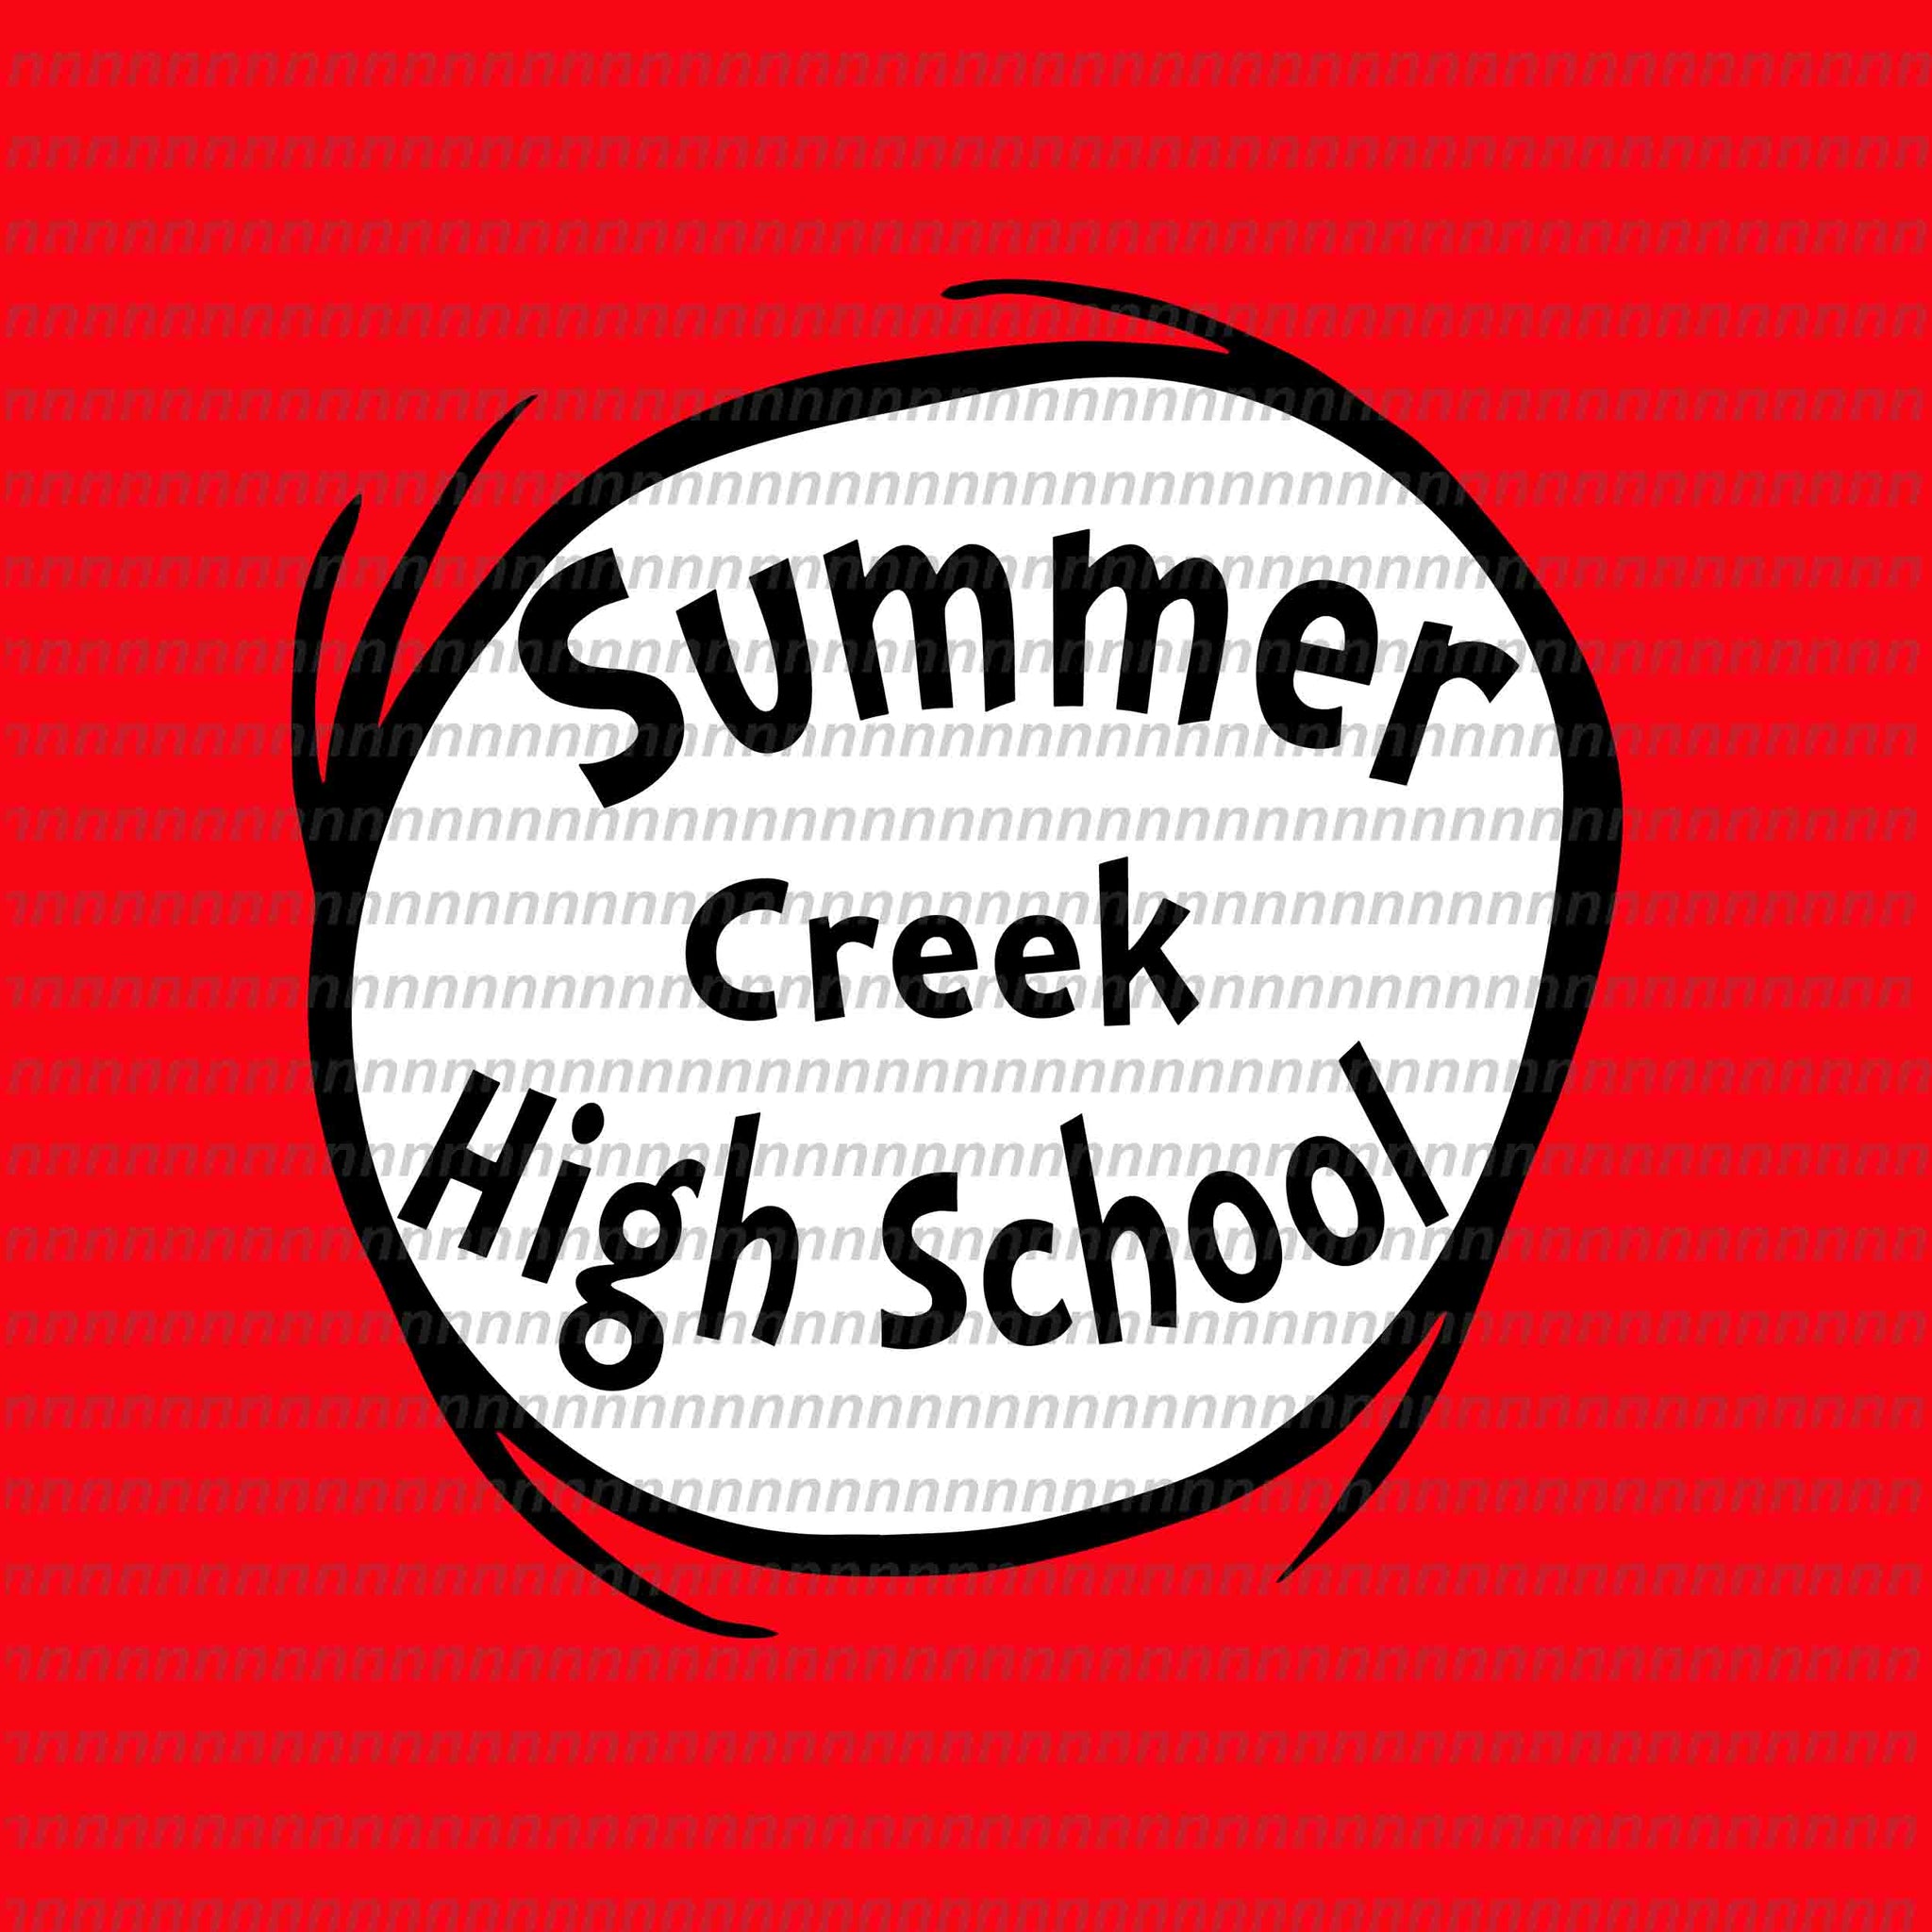 Summer creek high school svg, dr seuss svg,dr seuss vector, dr seuss quote, dr seuss design, Cat in the hat svg, thing 1 thing 2 thing 3, svg, png, dxf, eps file